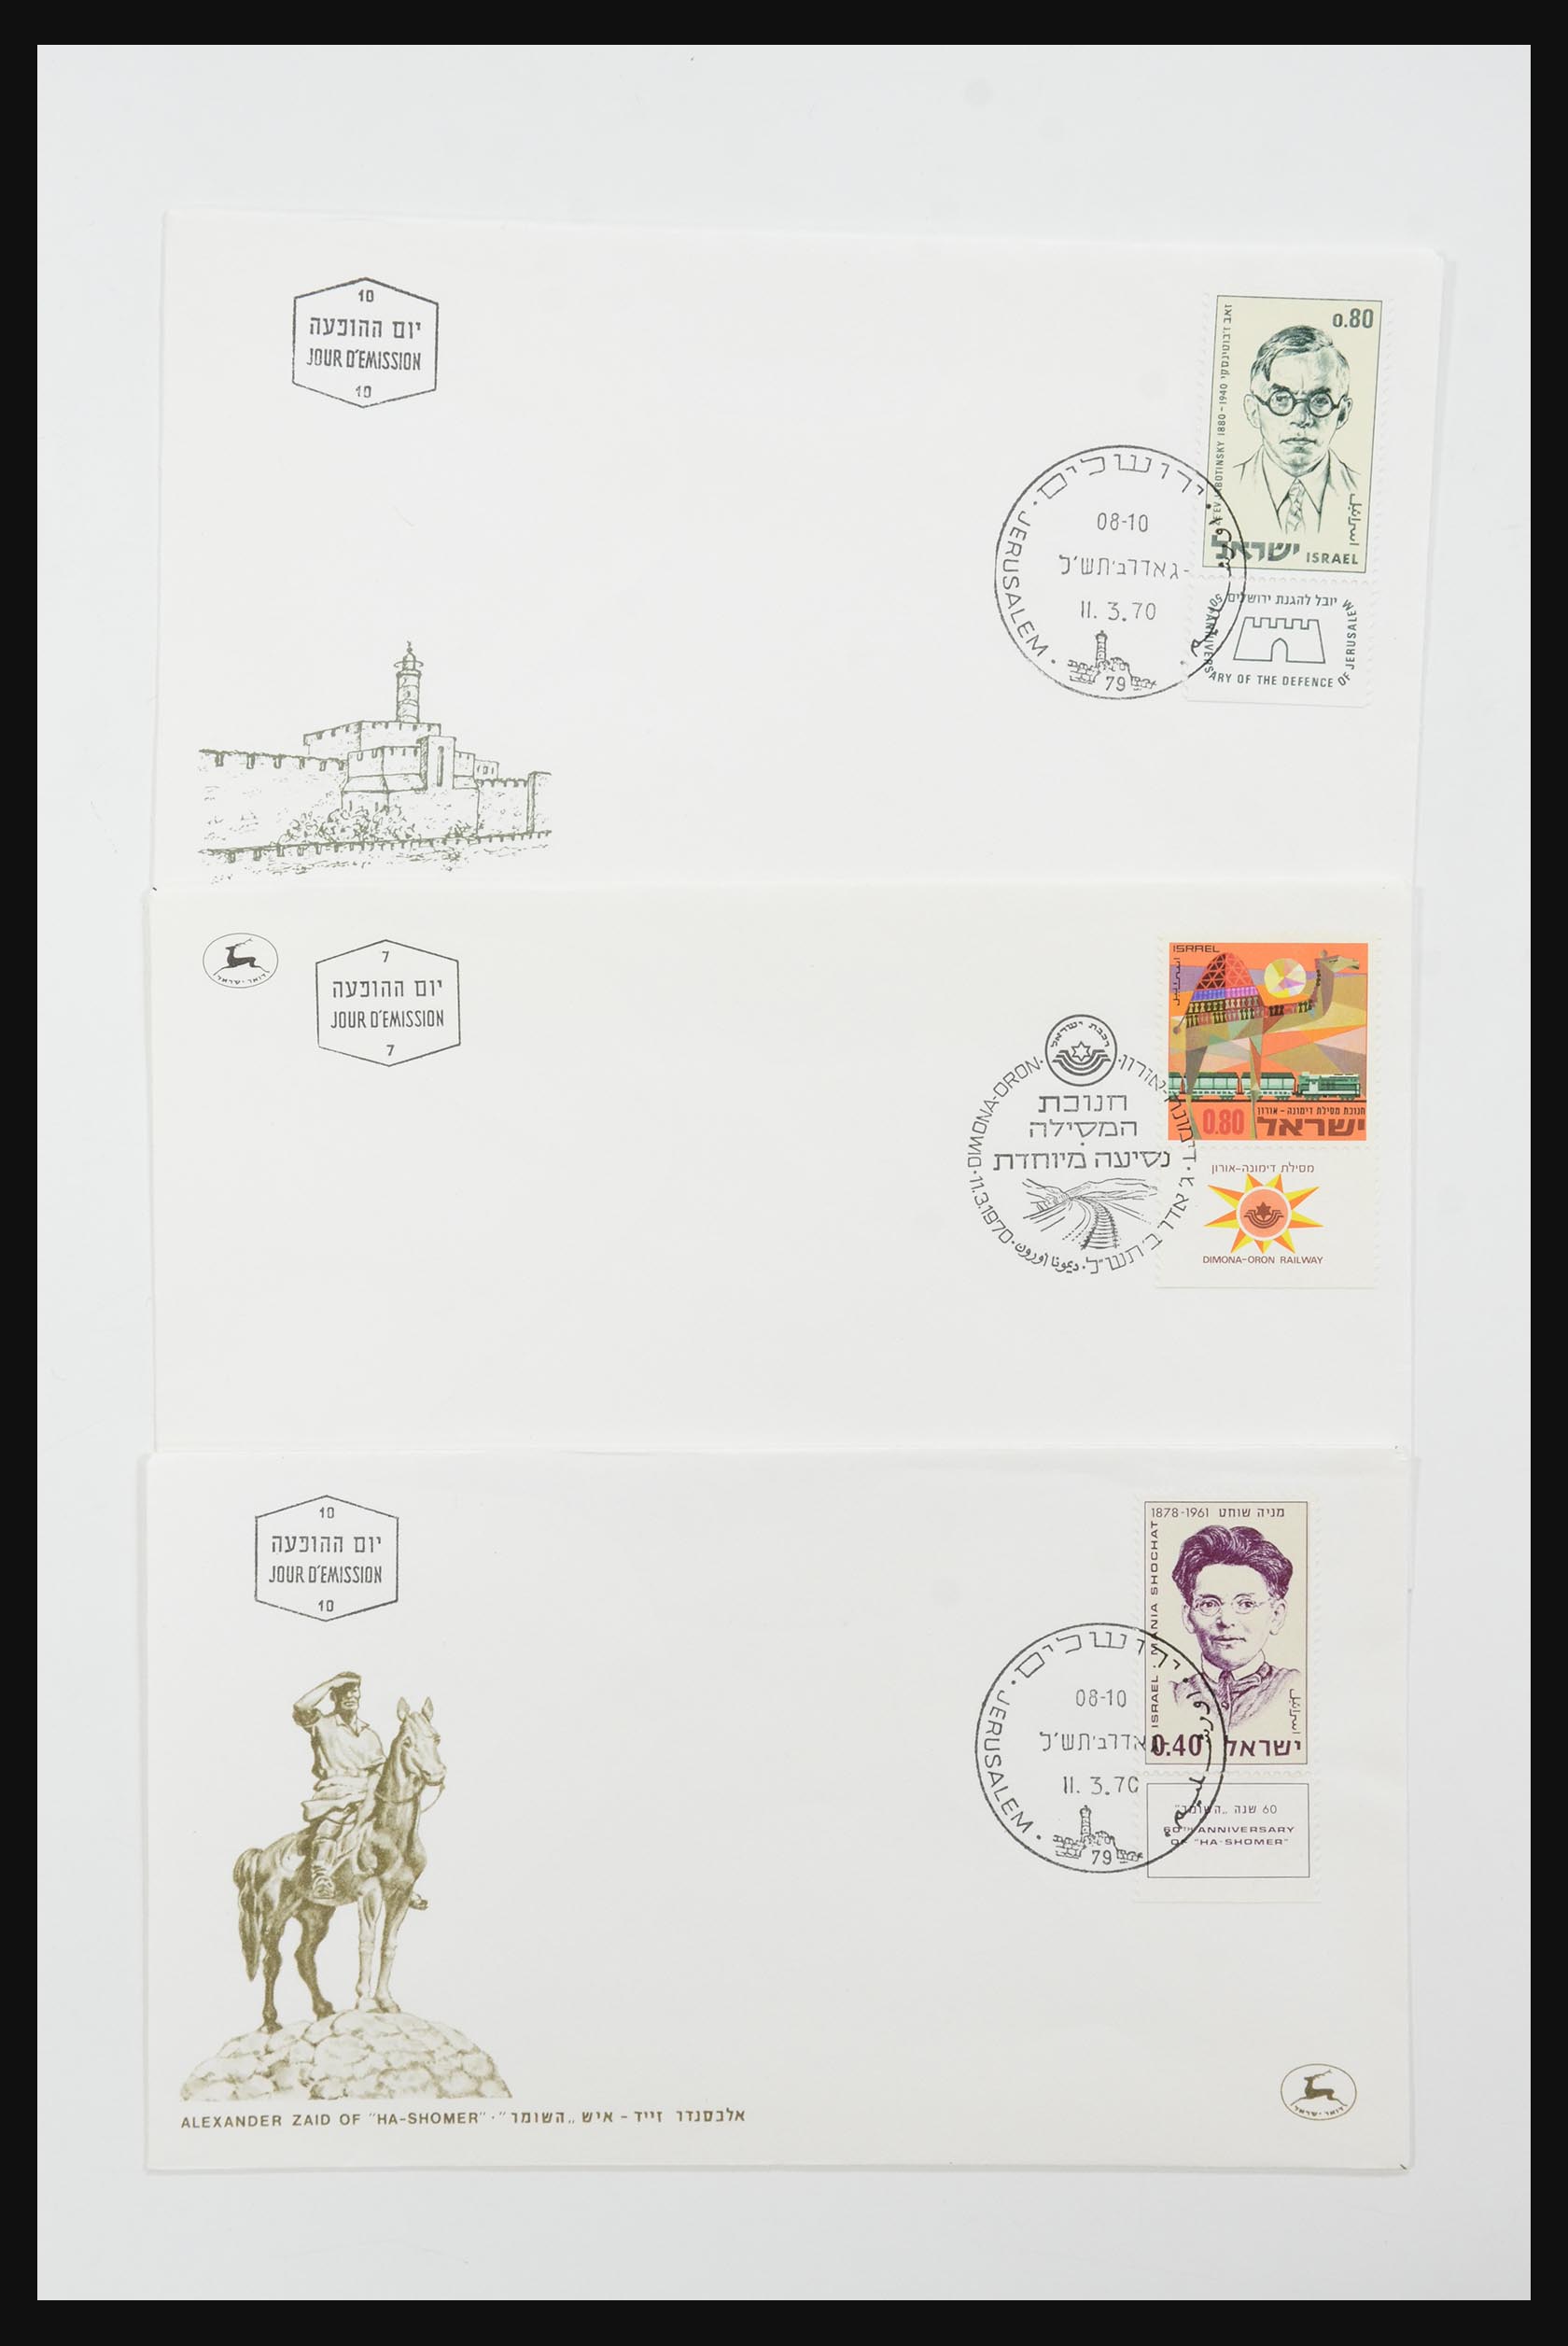 31924 582 - 31924 Israël fdc-collectie 1957-2003.